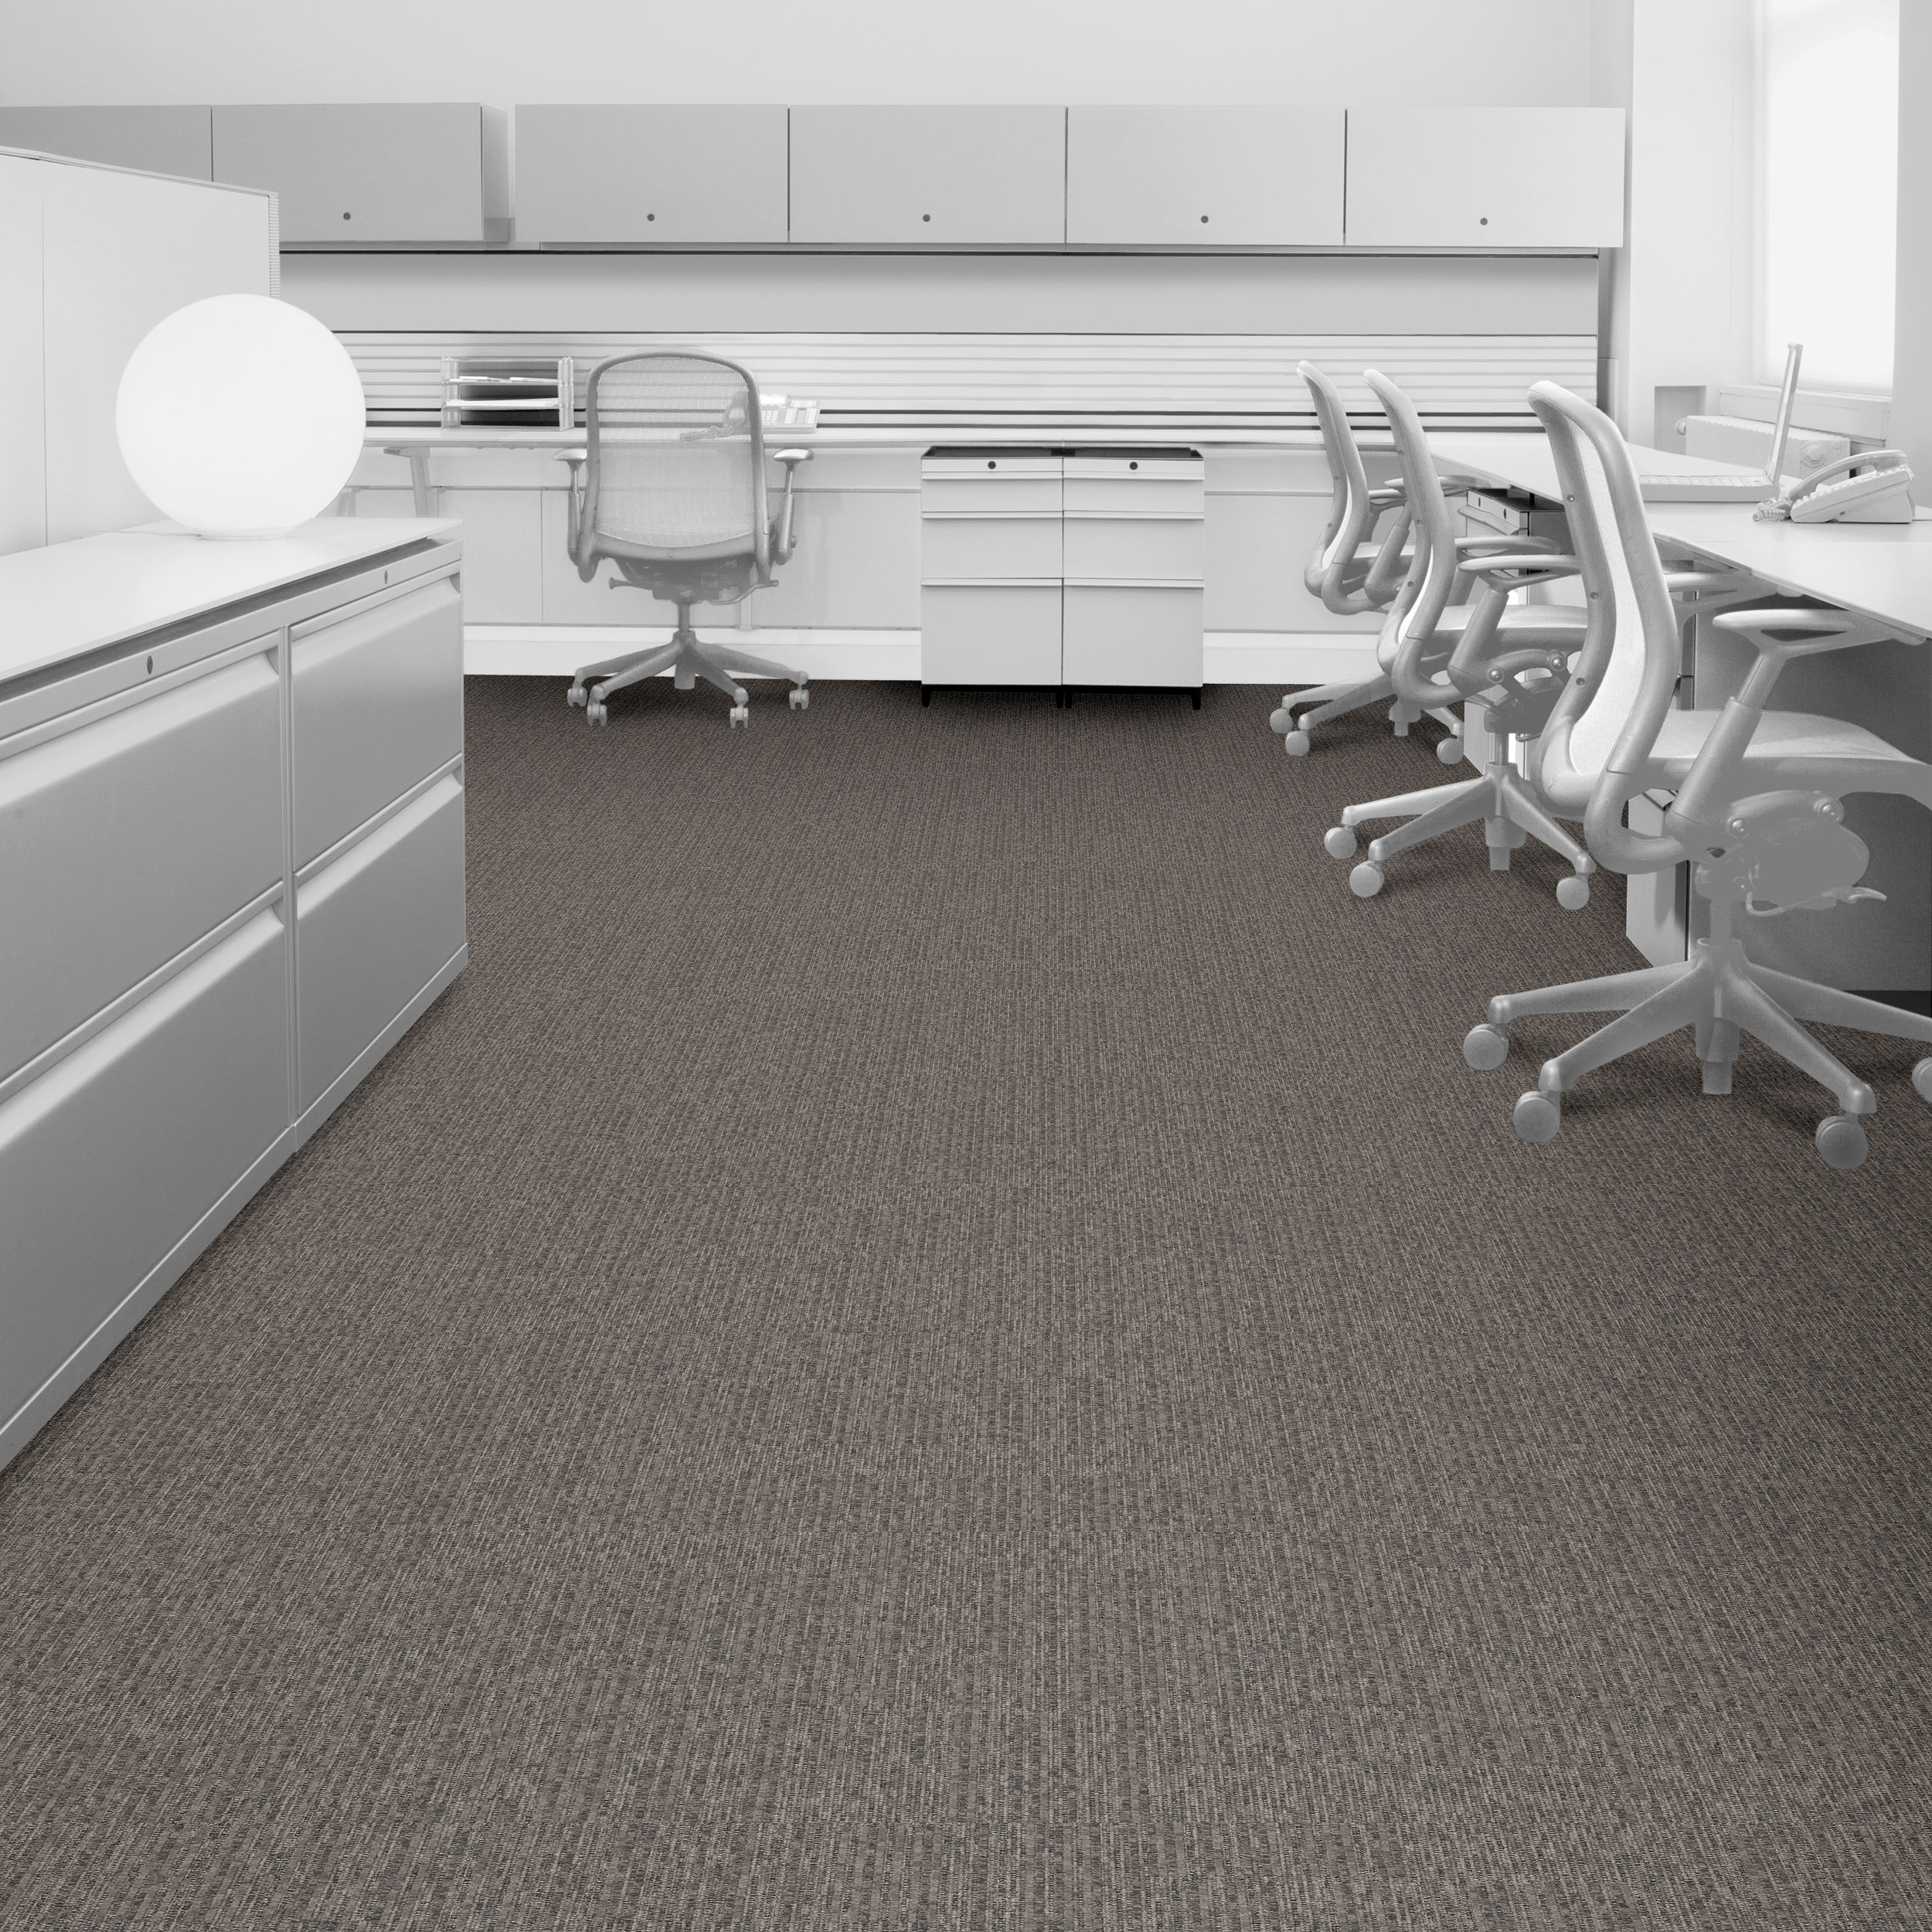 Interface Equilibrium Persistence Carpet Tile in office setting.